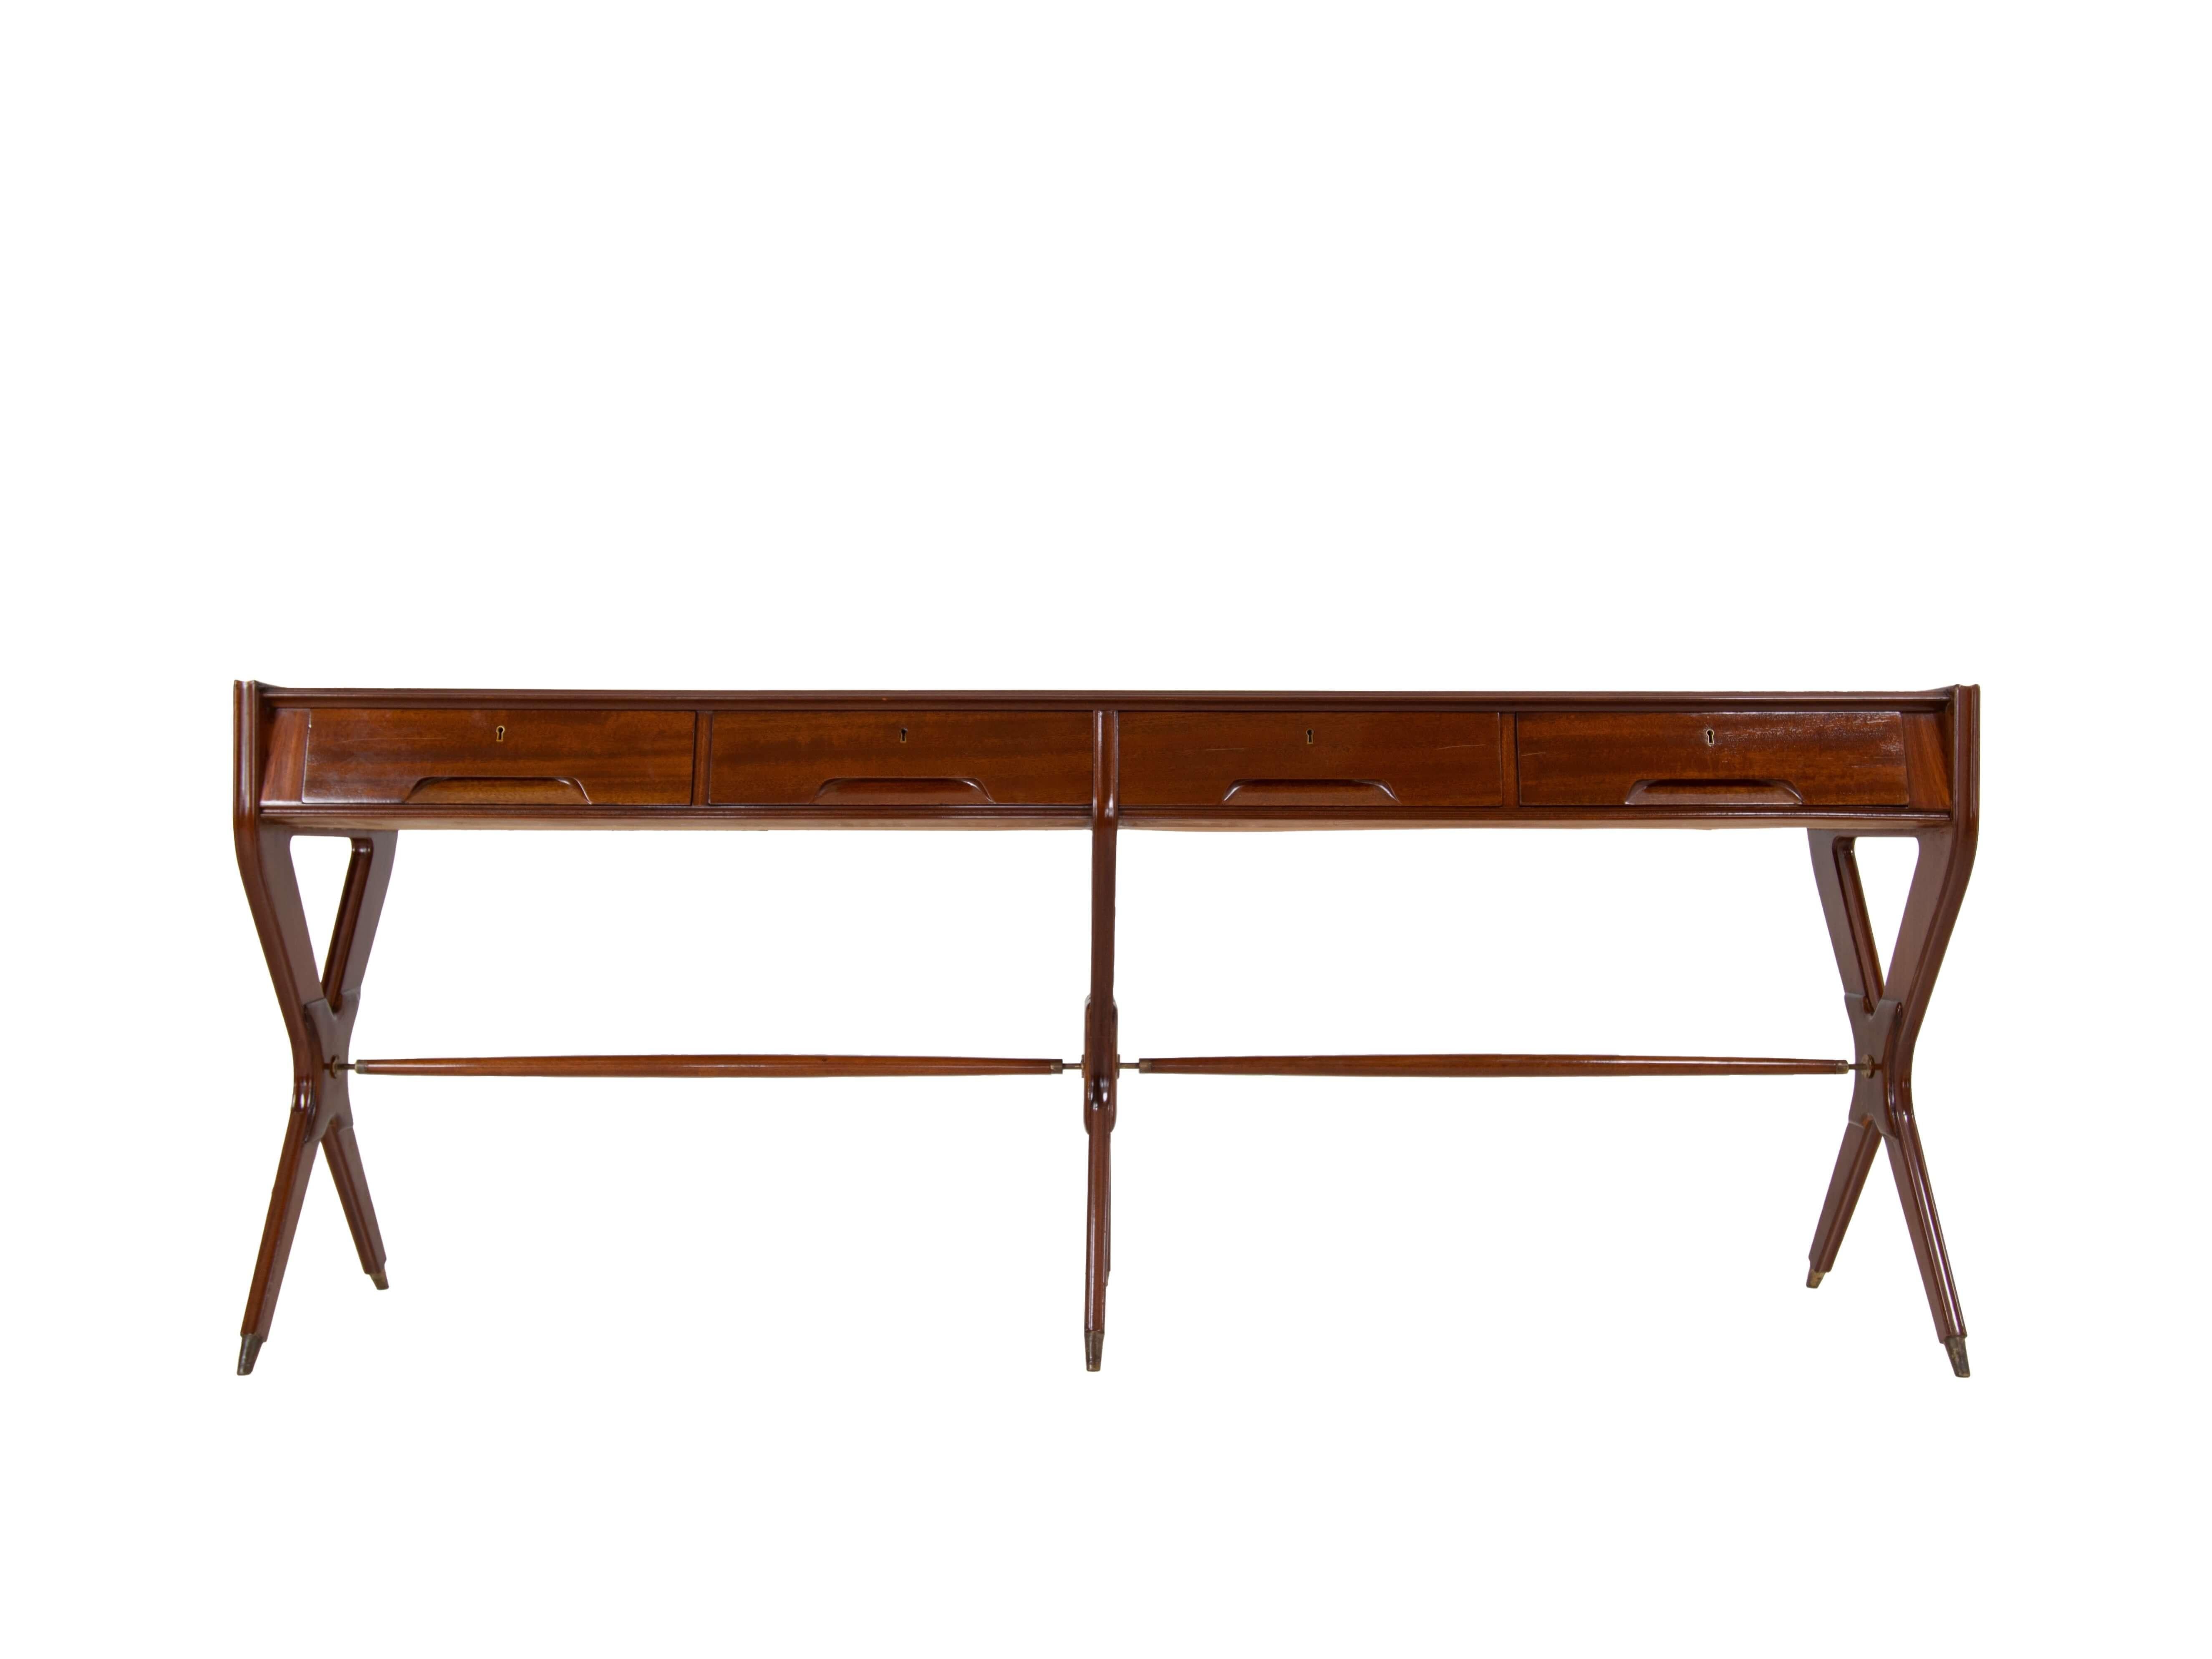 Very rare Osvaldo Borsani console in Mahogany Veneer and Brass, Arredamenti Borsani Italy 1950s. It has four drawers with carved handles. The console has three crossed legs with a horizontal bar and brass feet. The craftsmanship of this console is